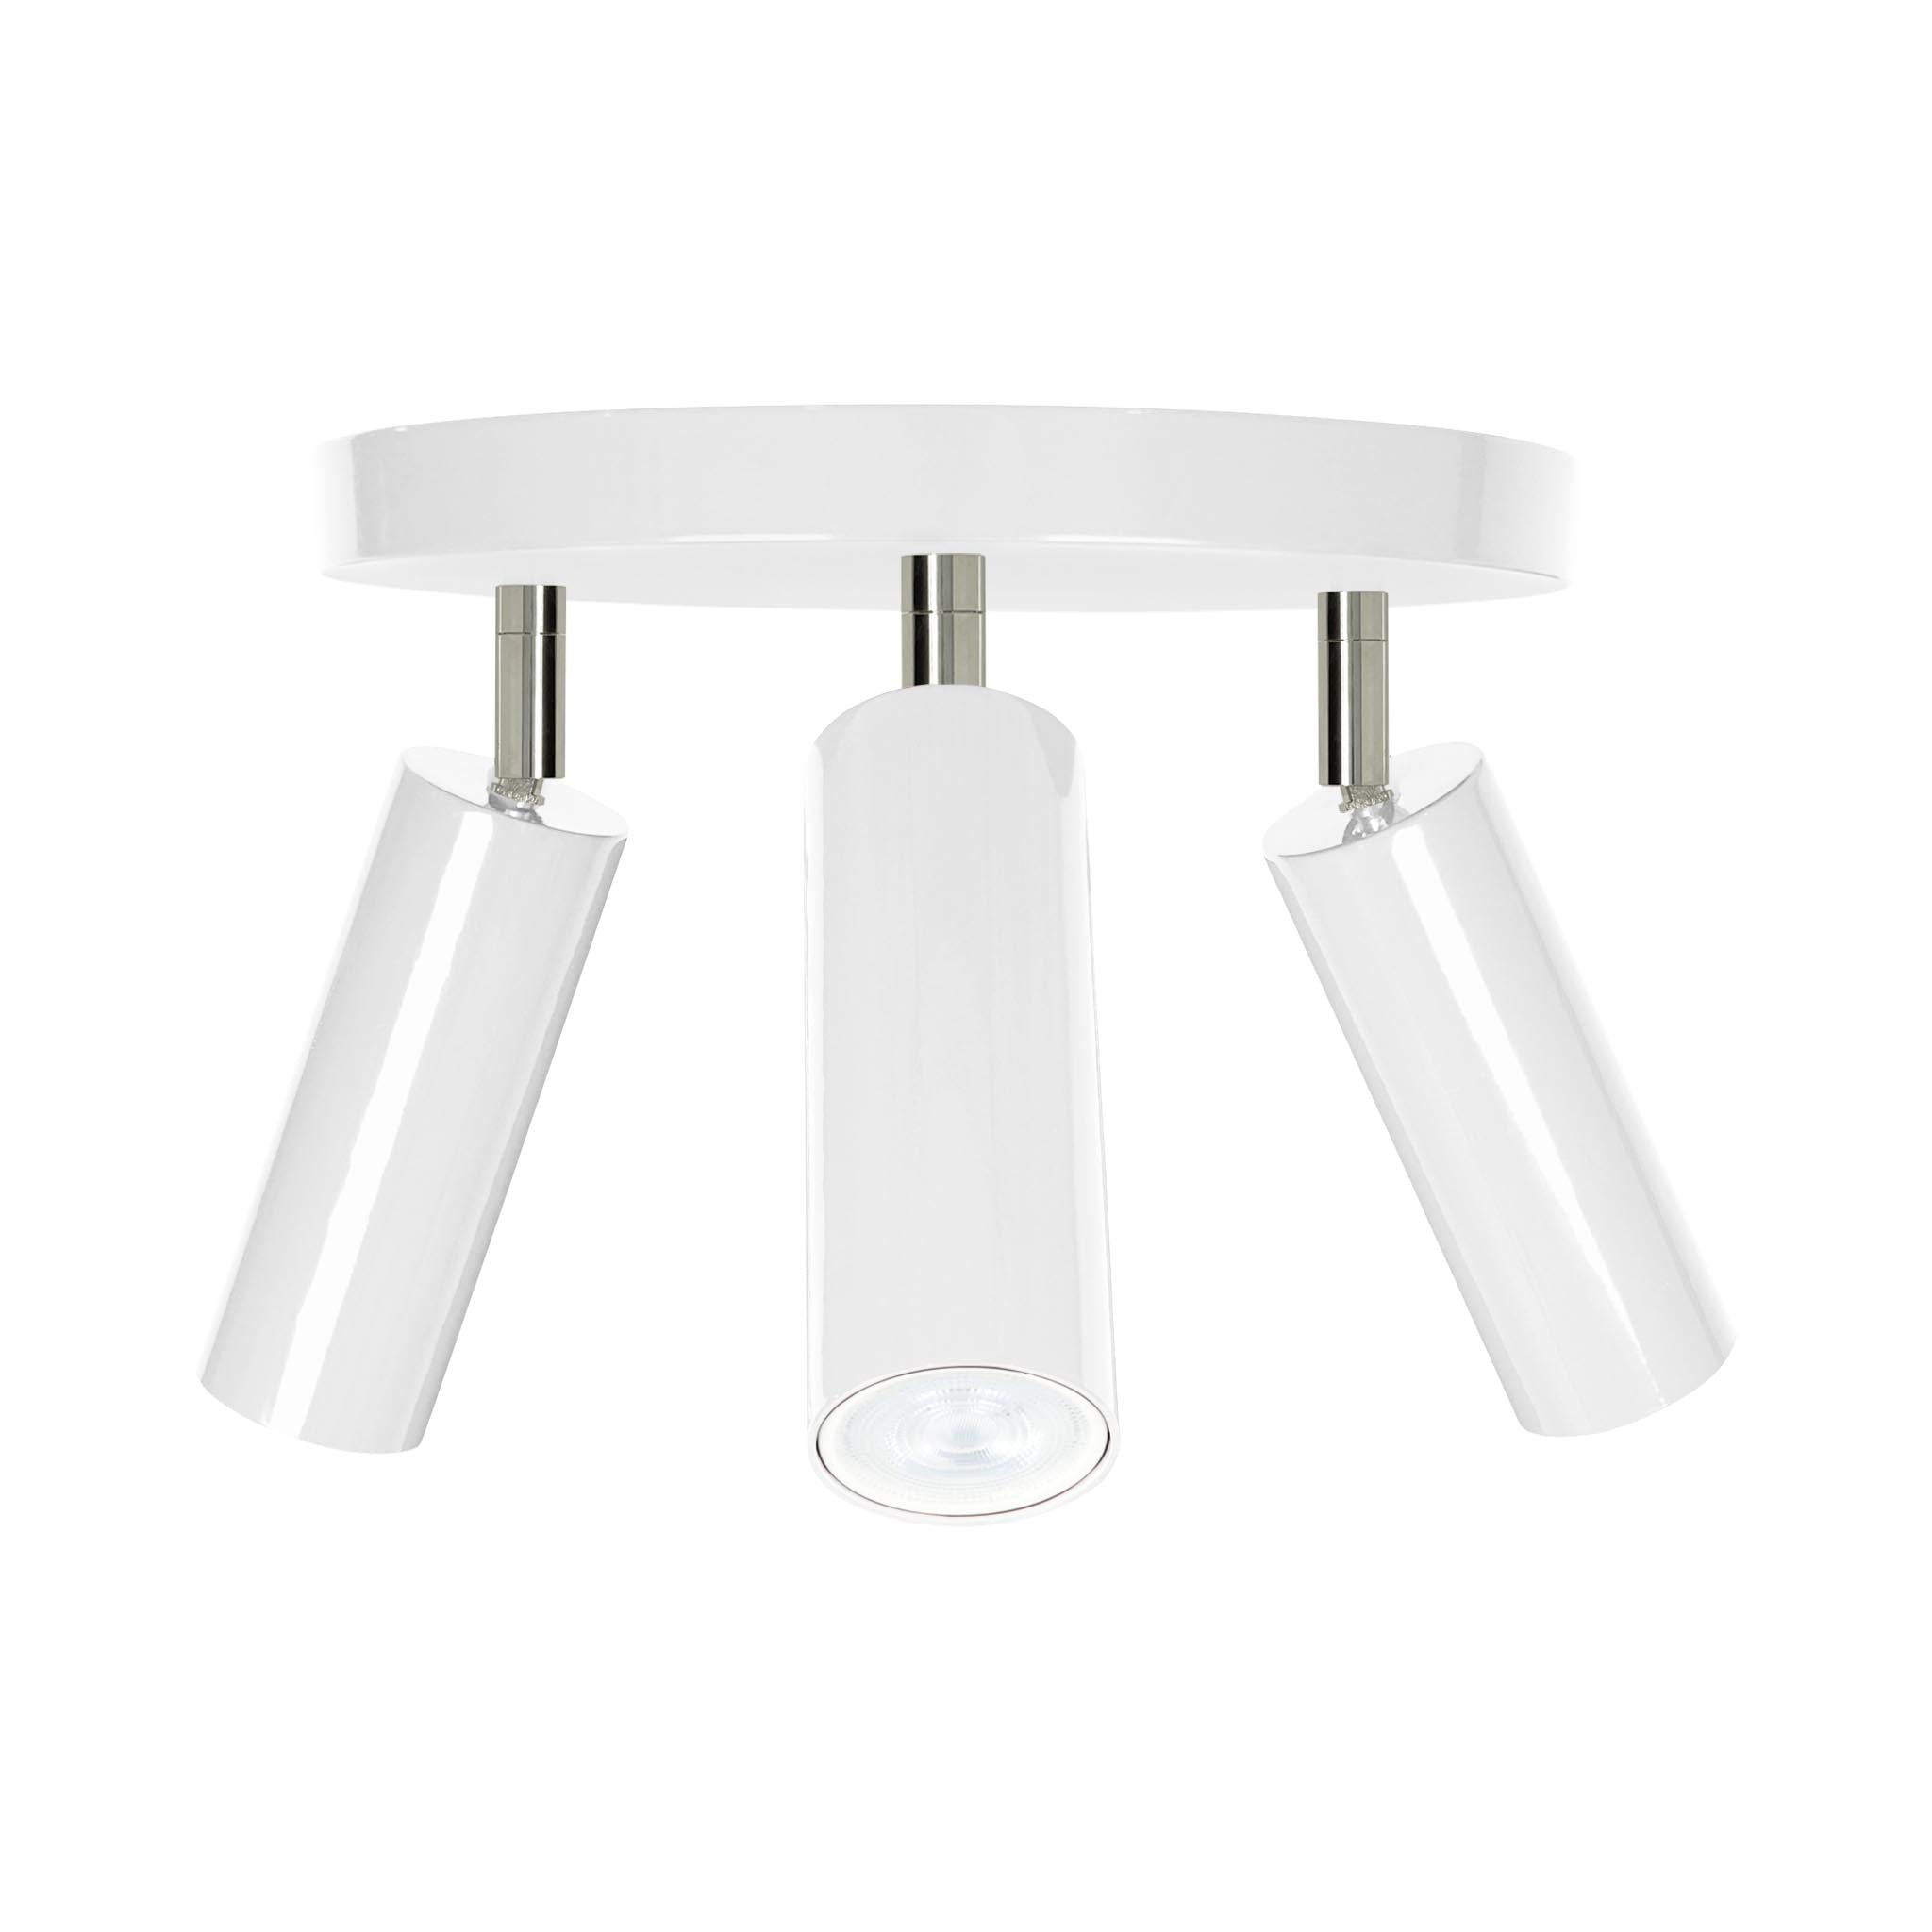 Nickel and white color Pose flush mount Dutton Brown lighting